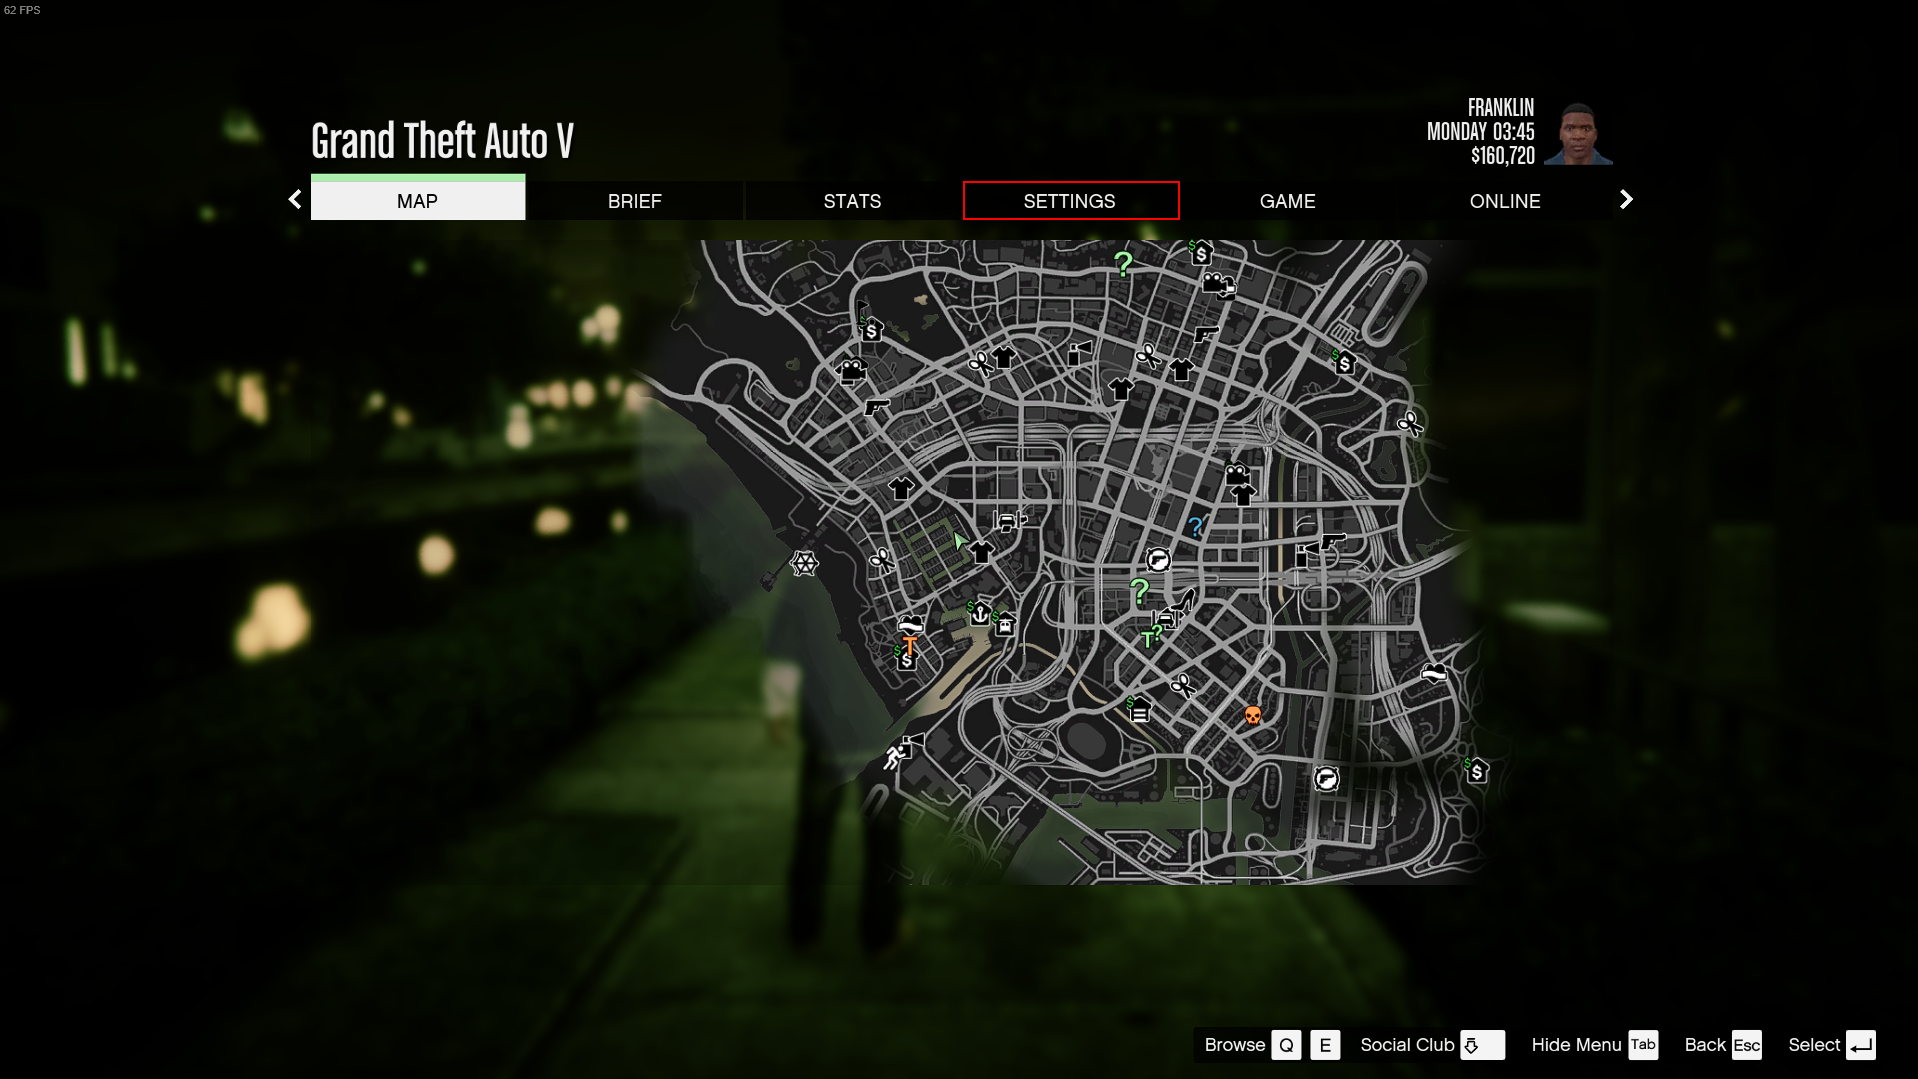 Grand Theft Auto V - How to Unlock Expanded and Enhanced Edition on PC - 1 - Open the settings - C2F032F